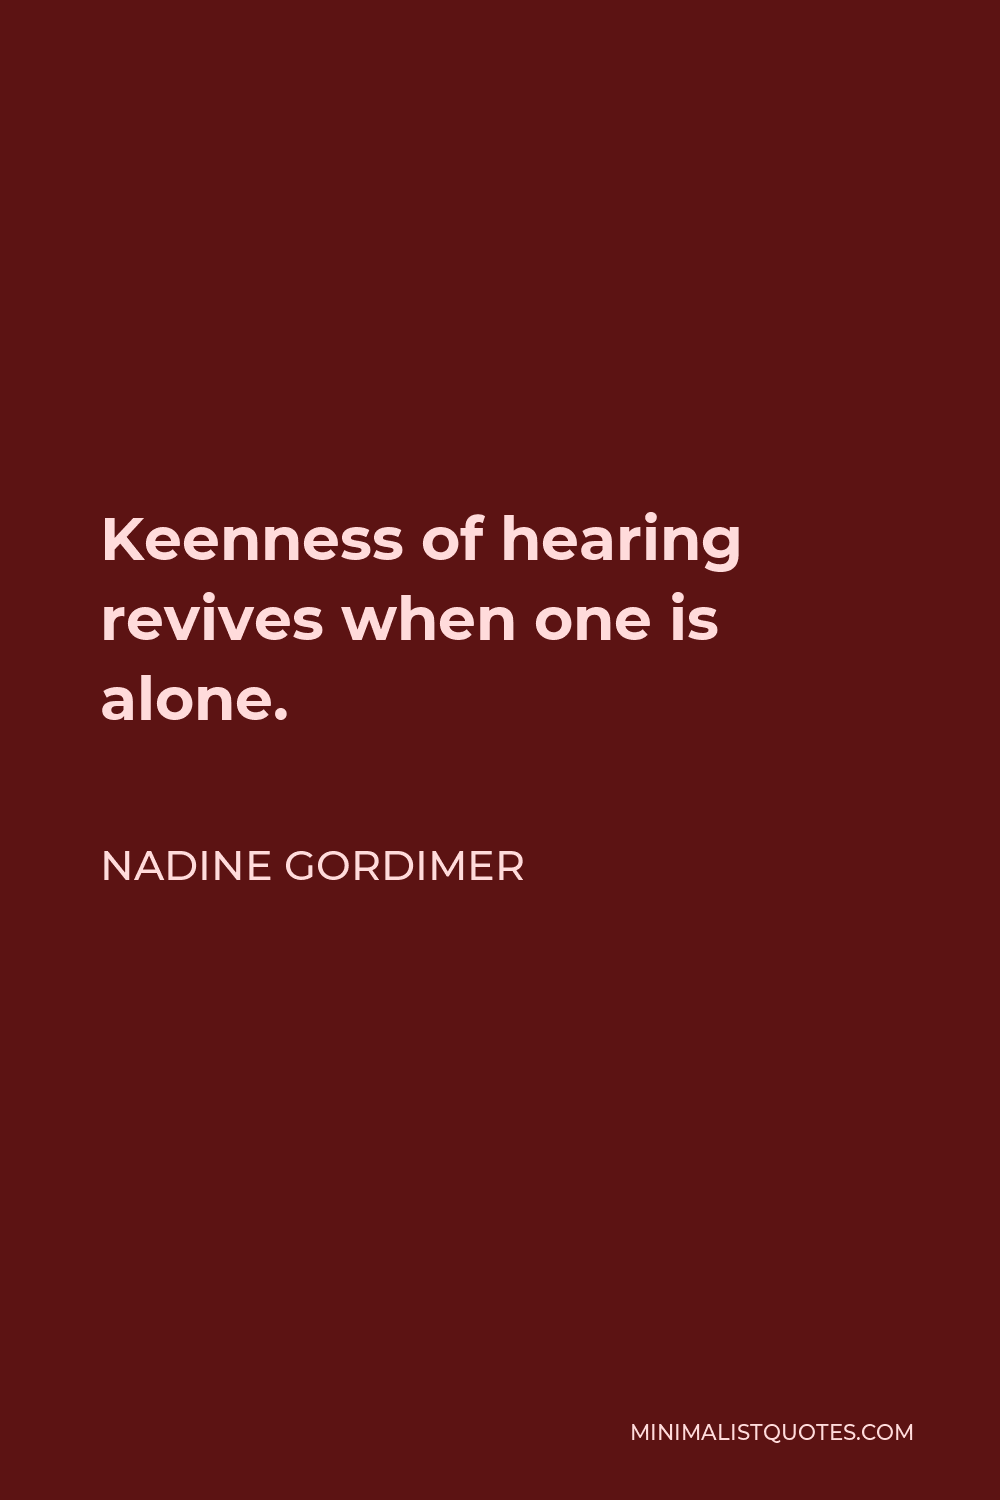 Nadine Gordimer Quote - Keenness of hearing revives when one is alone.